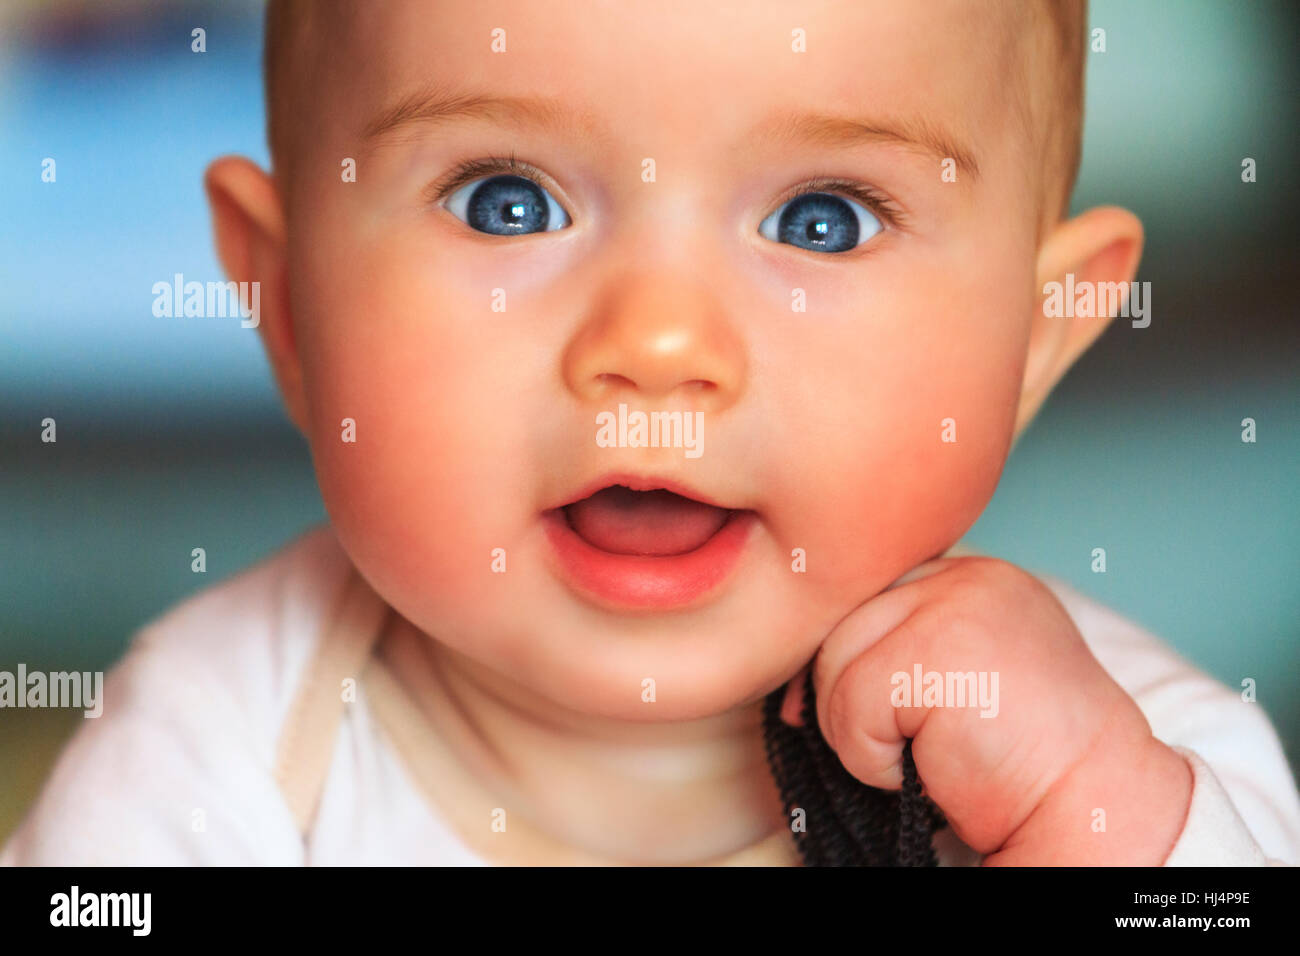 Beautiful smiling cute baby girl,pink cheeks, blue eyes, open mouth ...